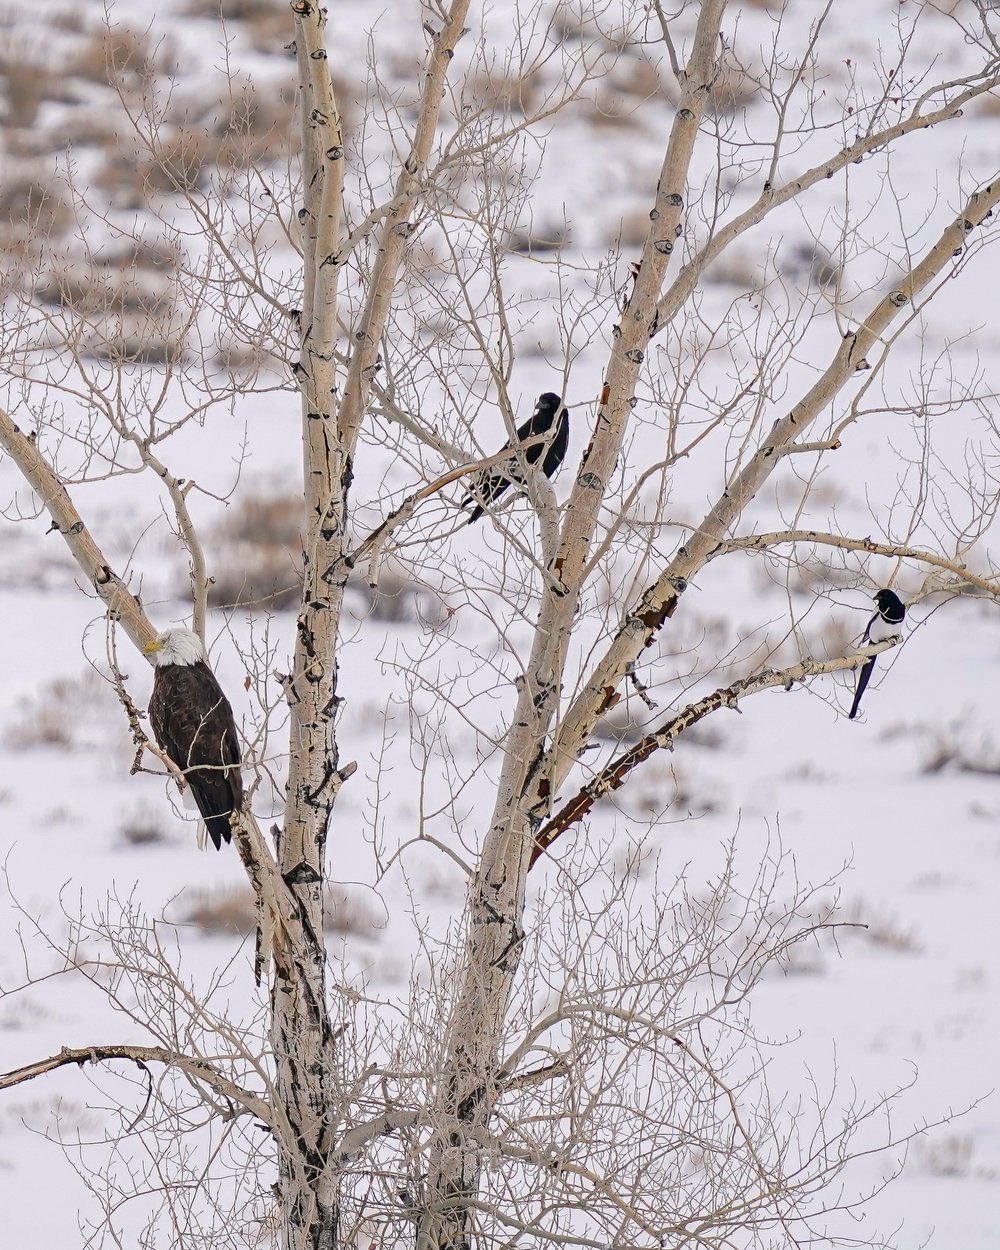 A bald eagle with raven and magpie